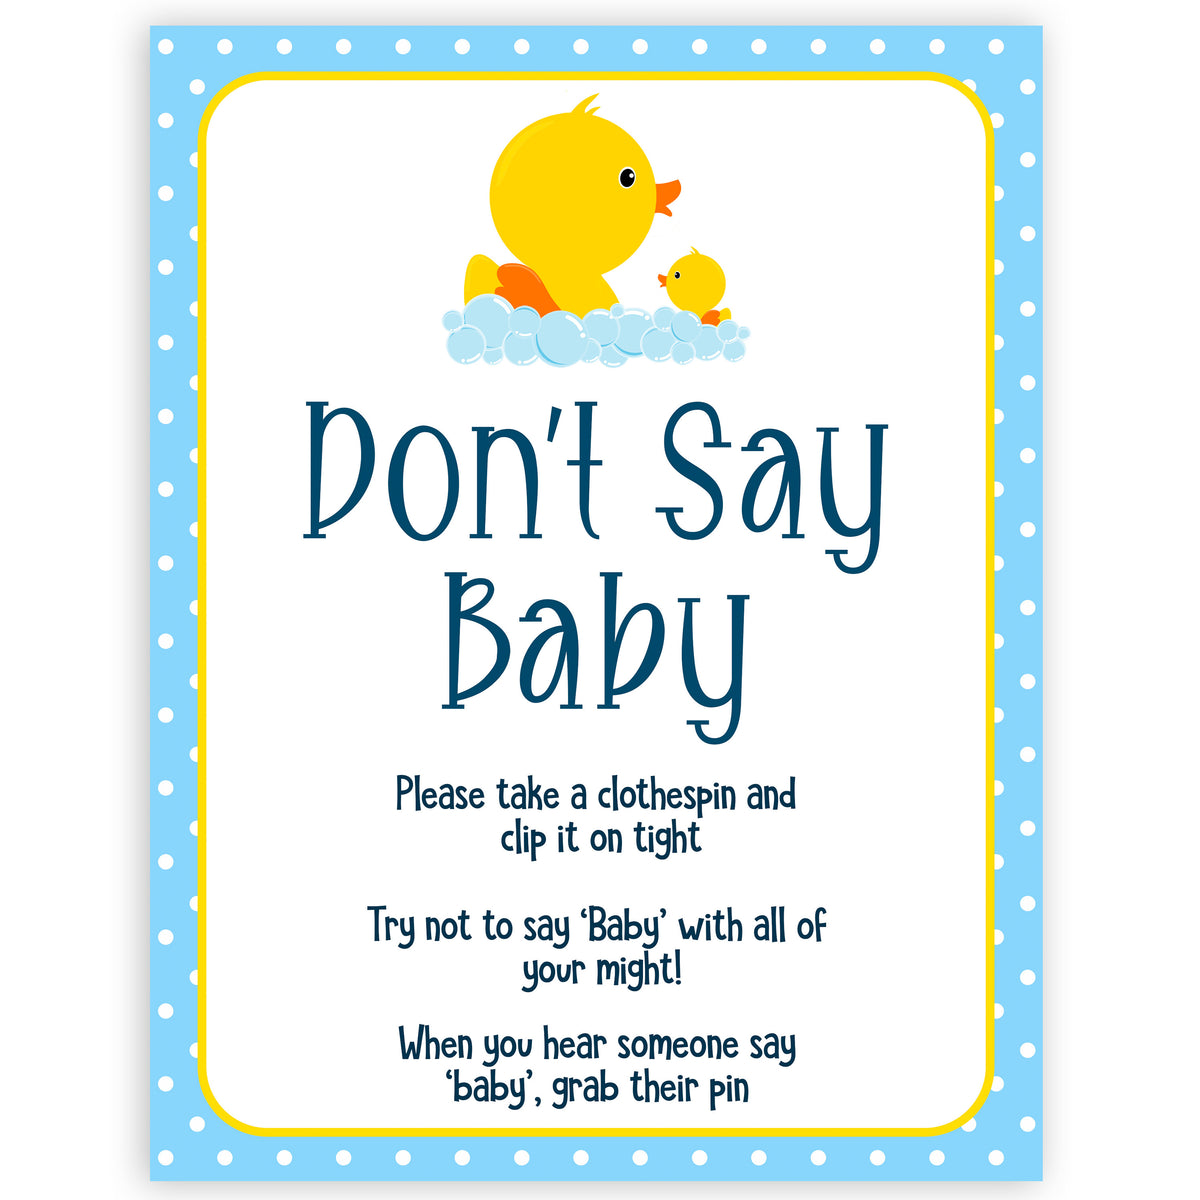 rubber ducky baby games, dont say baby, don't say baby baby game, printable baby games, baby shower games, rubber ducky baby theme, fun baby games, popular baby games